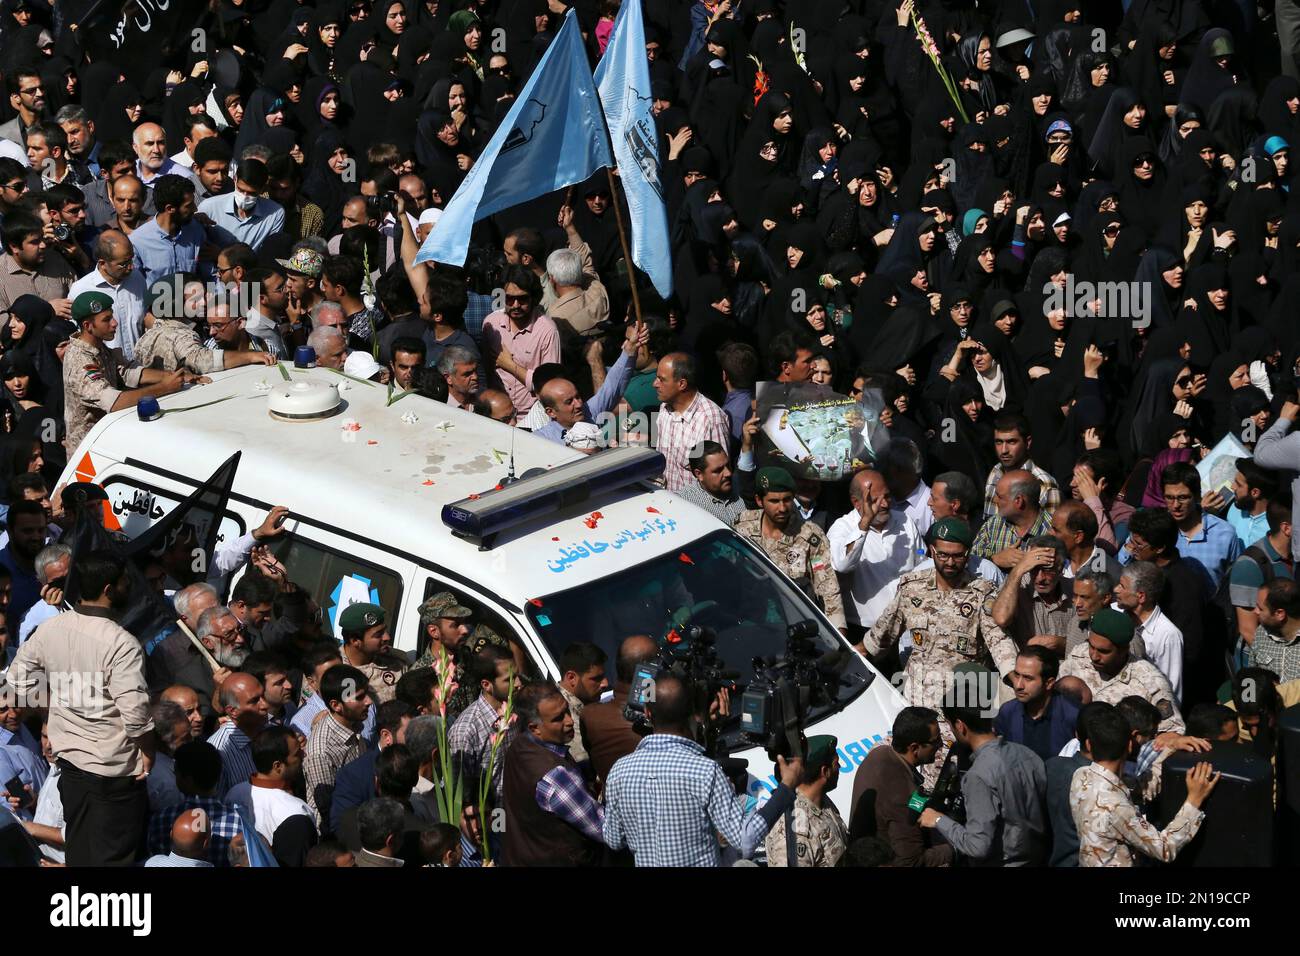 An Ambulance Carries The Body Of A Pilgrim Who Was Killed In A Stampede During The Hajj